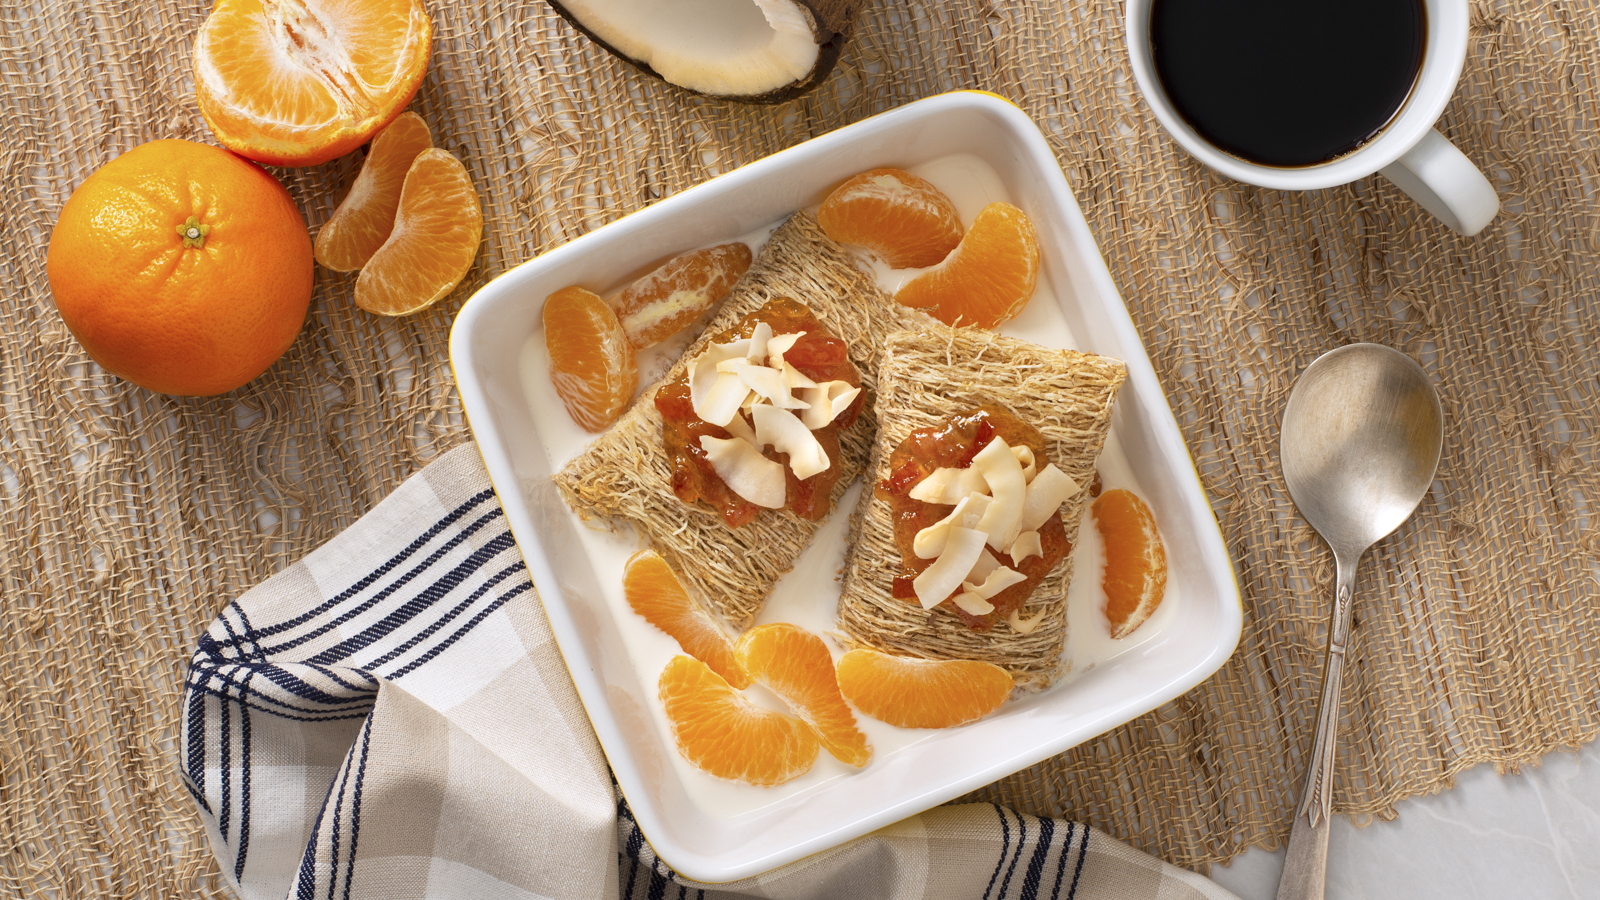 Shredded Wheat Get Coconutty breakfast bowl with mandarin oranges and coconut shavings on top.